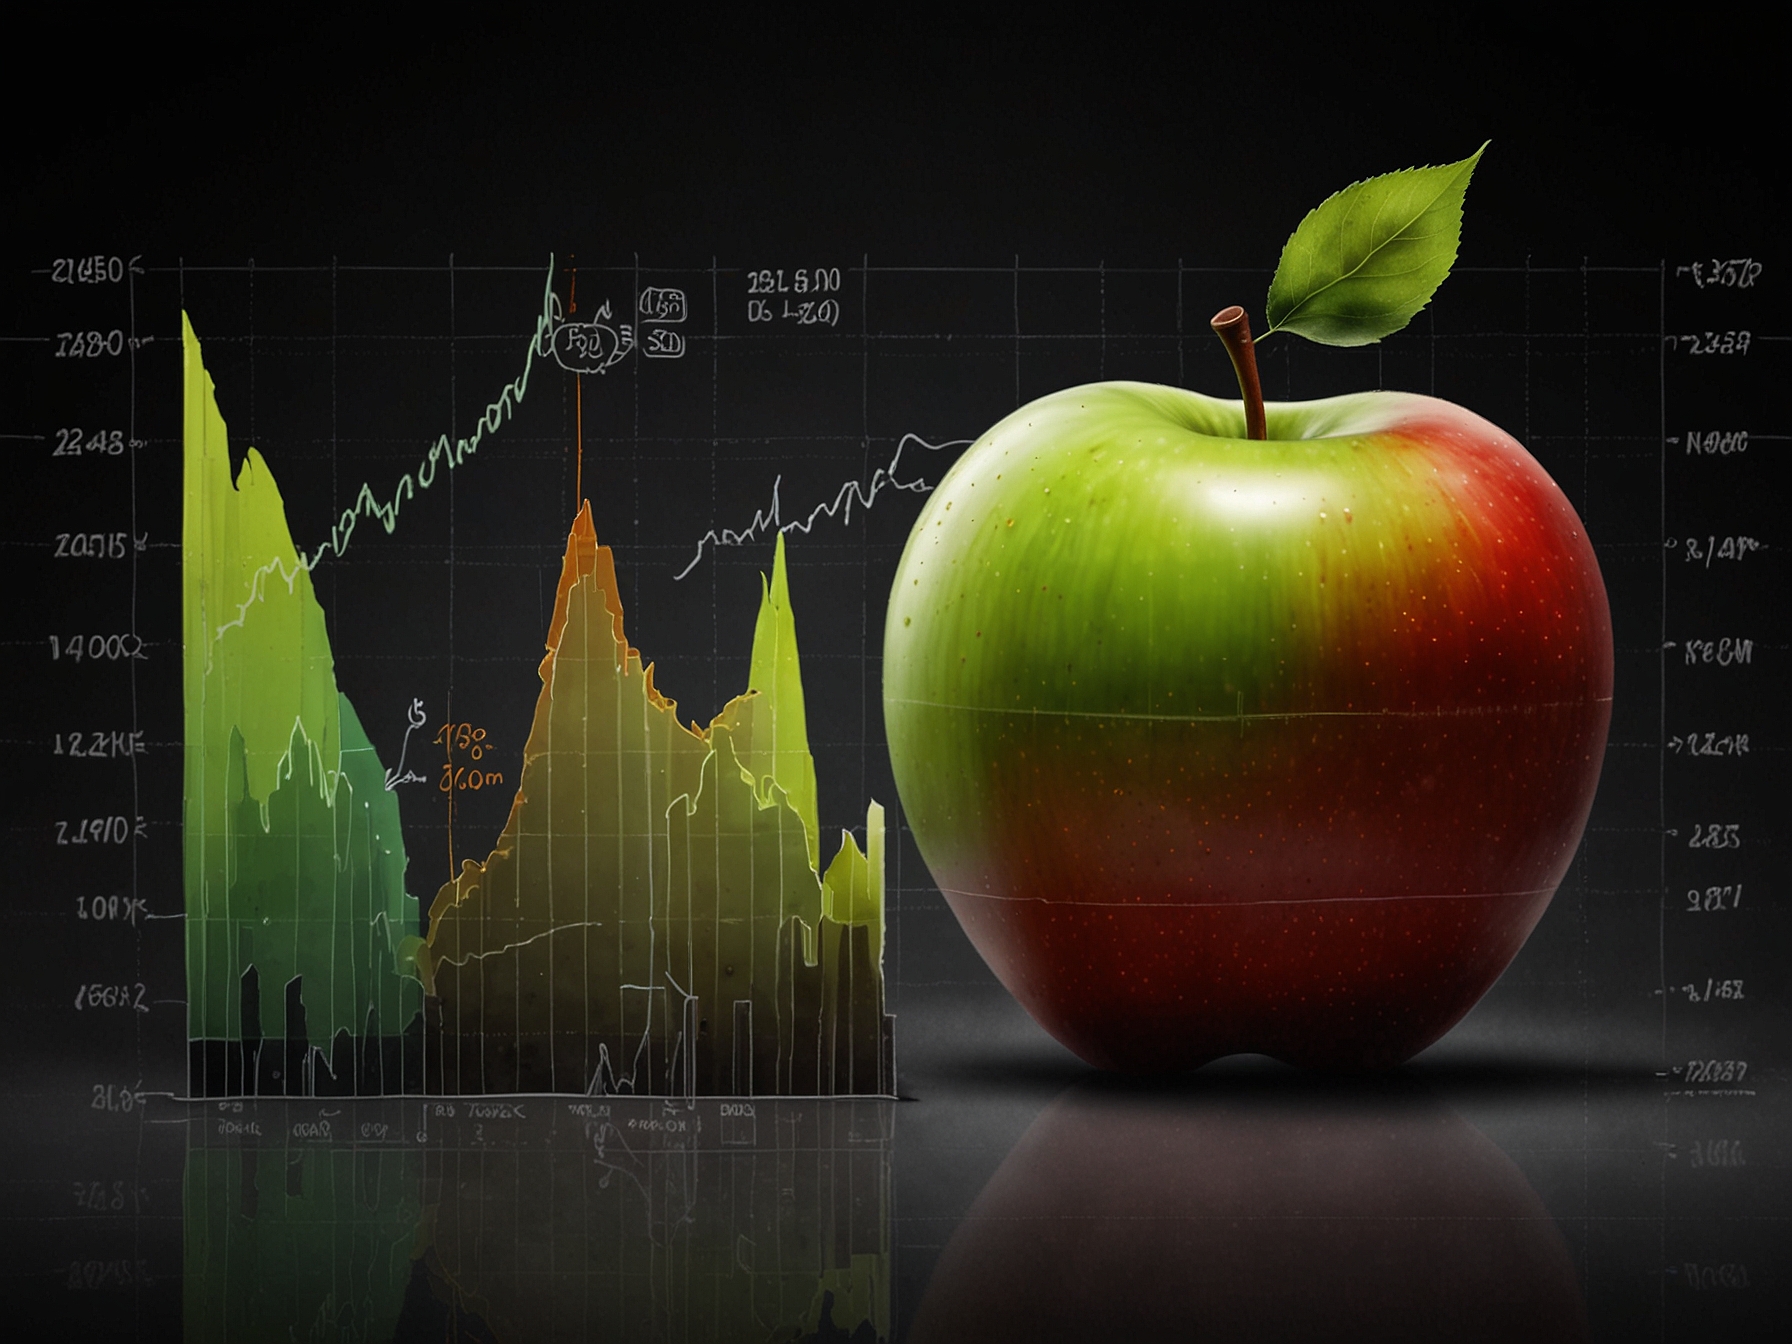 A visual of Apple's financial growth chart and a depiction of sustainable practices, highlighting its strong financial performance and commitment to environmental responsibility.